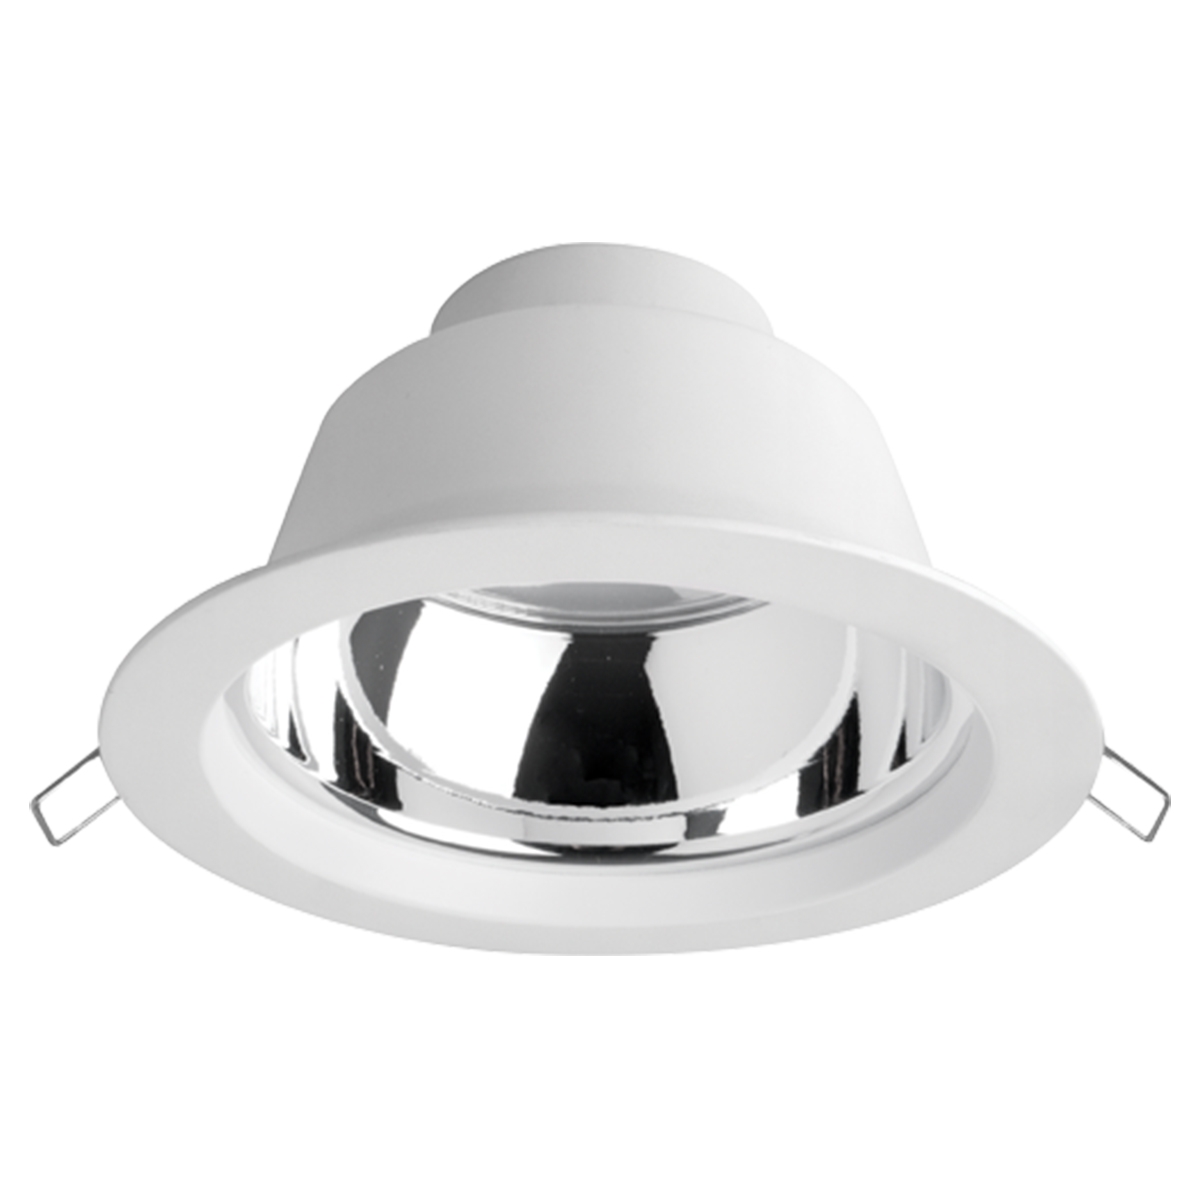 Megaman Recessed Integrated LED Downlight F54100RC 9.5W Daylight